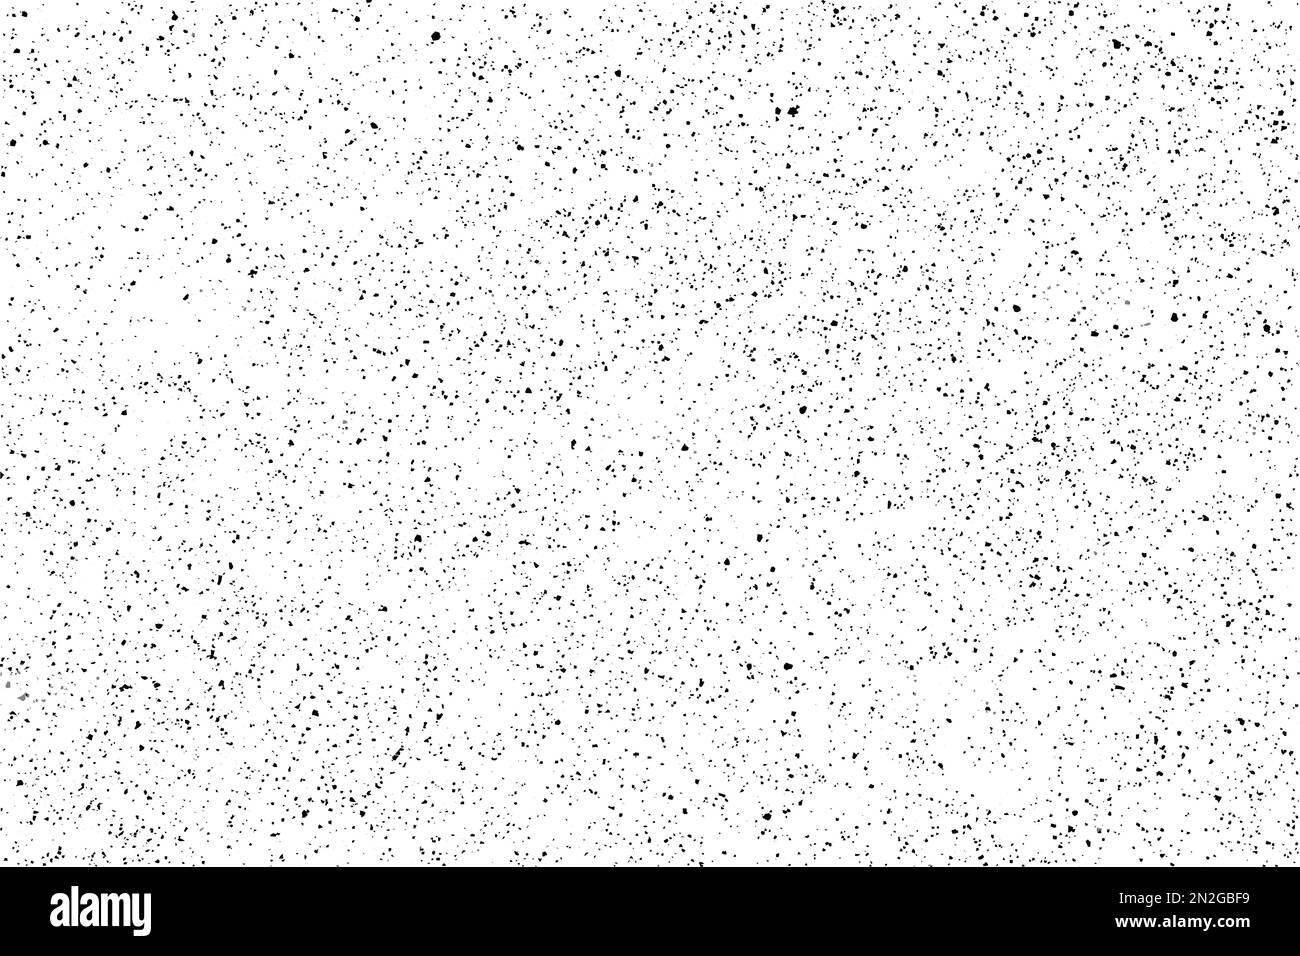 Black and white rusty grunge effect vector for the background. Grainy texture design on a white background. Dark texture and dust grunge effect for de Stock Vector